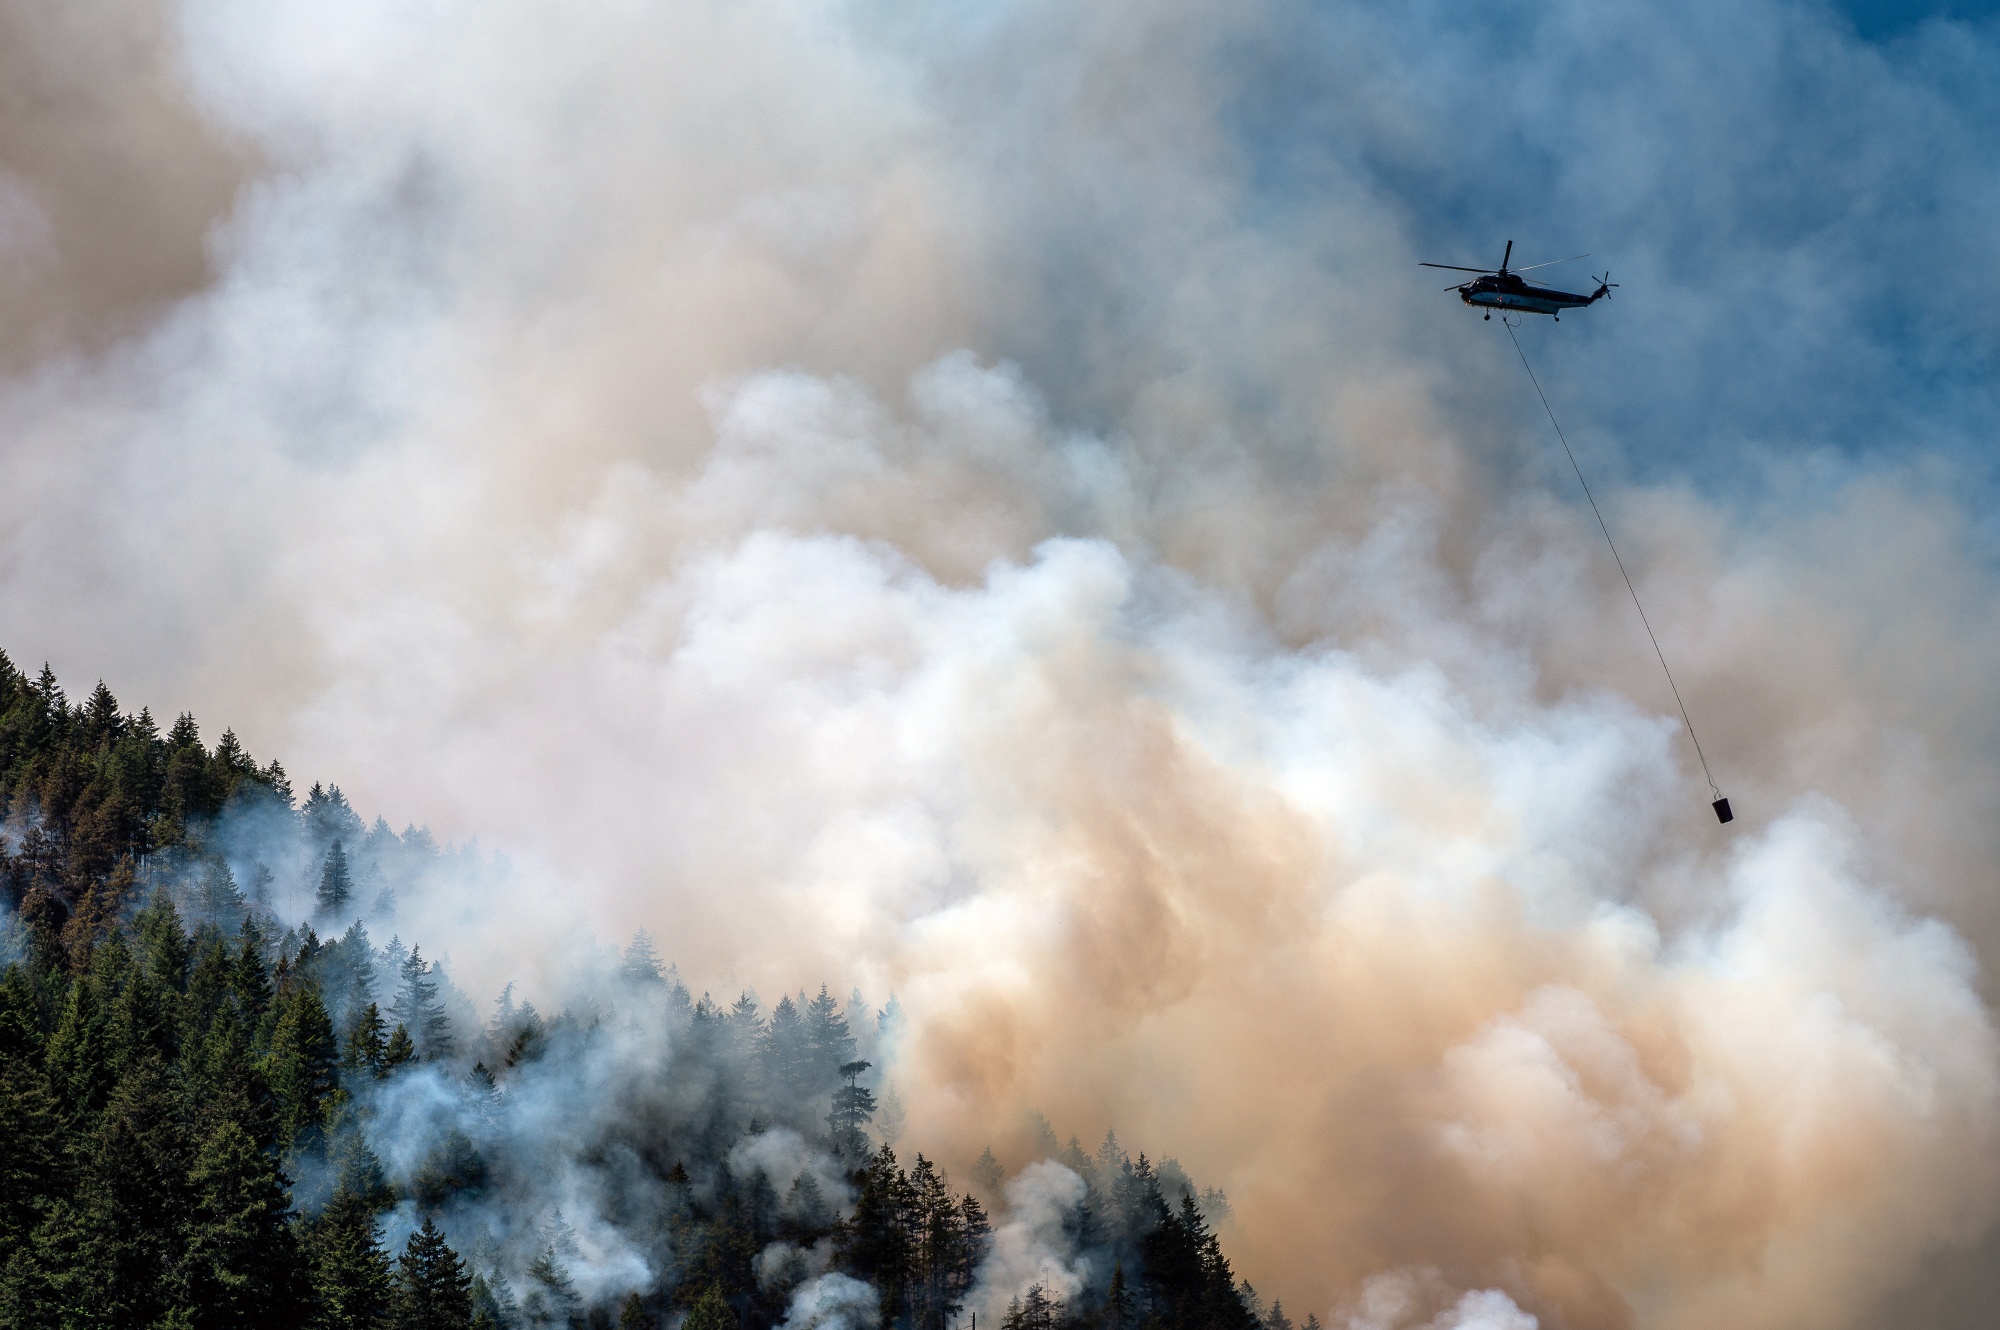 A helicopter waterbomber flies above the Cameron Bluffs wildfire near Port Alberni, British Columbia, on&nbsp;June 6.&nbsp;